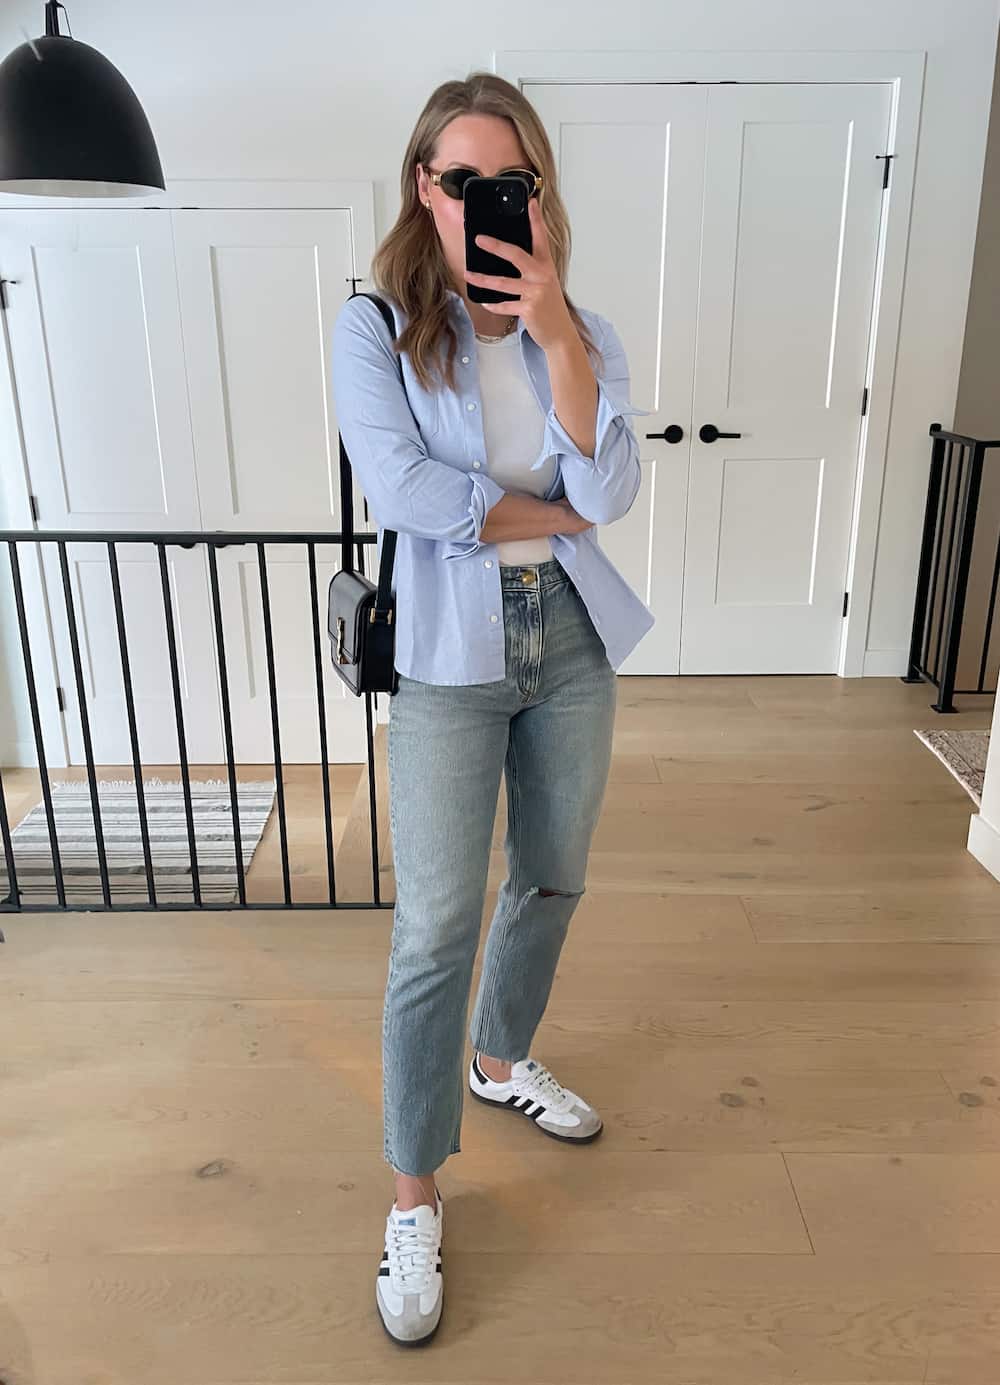 Christal wearing jeans, sneakers, a white tank top and an open blue button down.